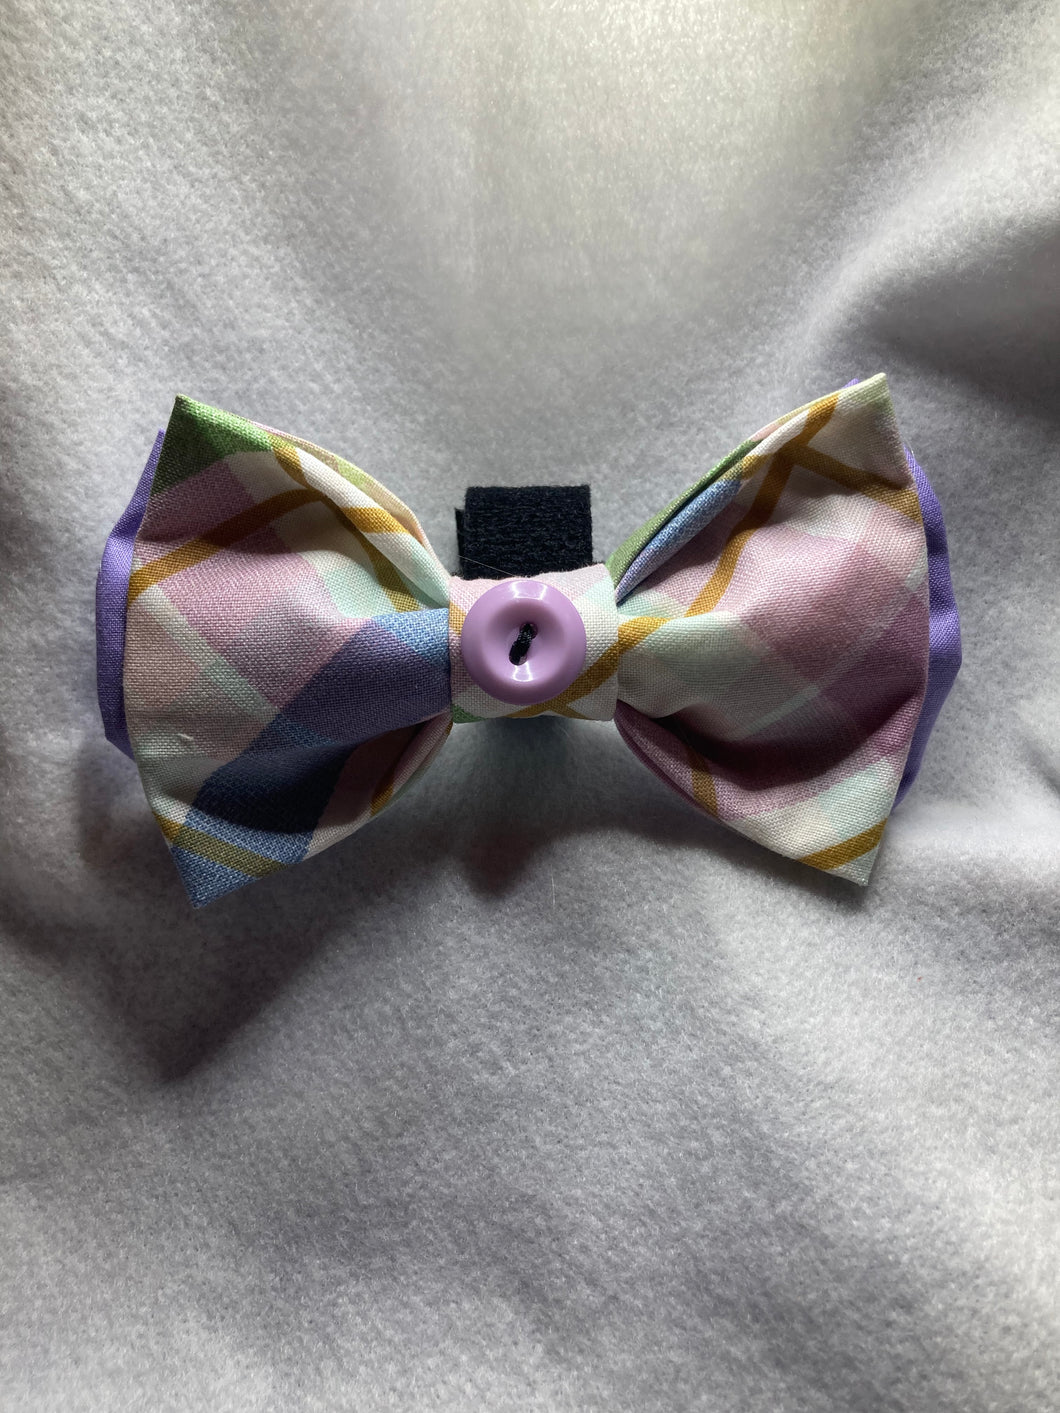 Easter Plaid Pet bow tie , available in 3 sizes, soft pastel colors. Velcros around collar